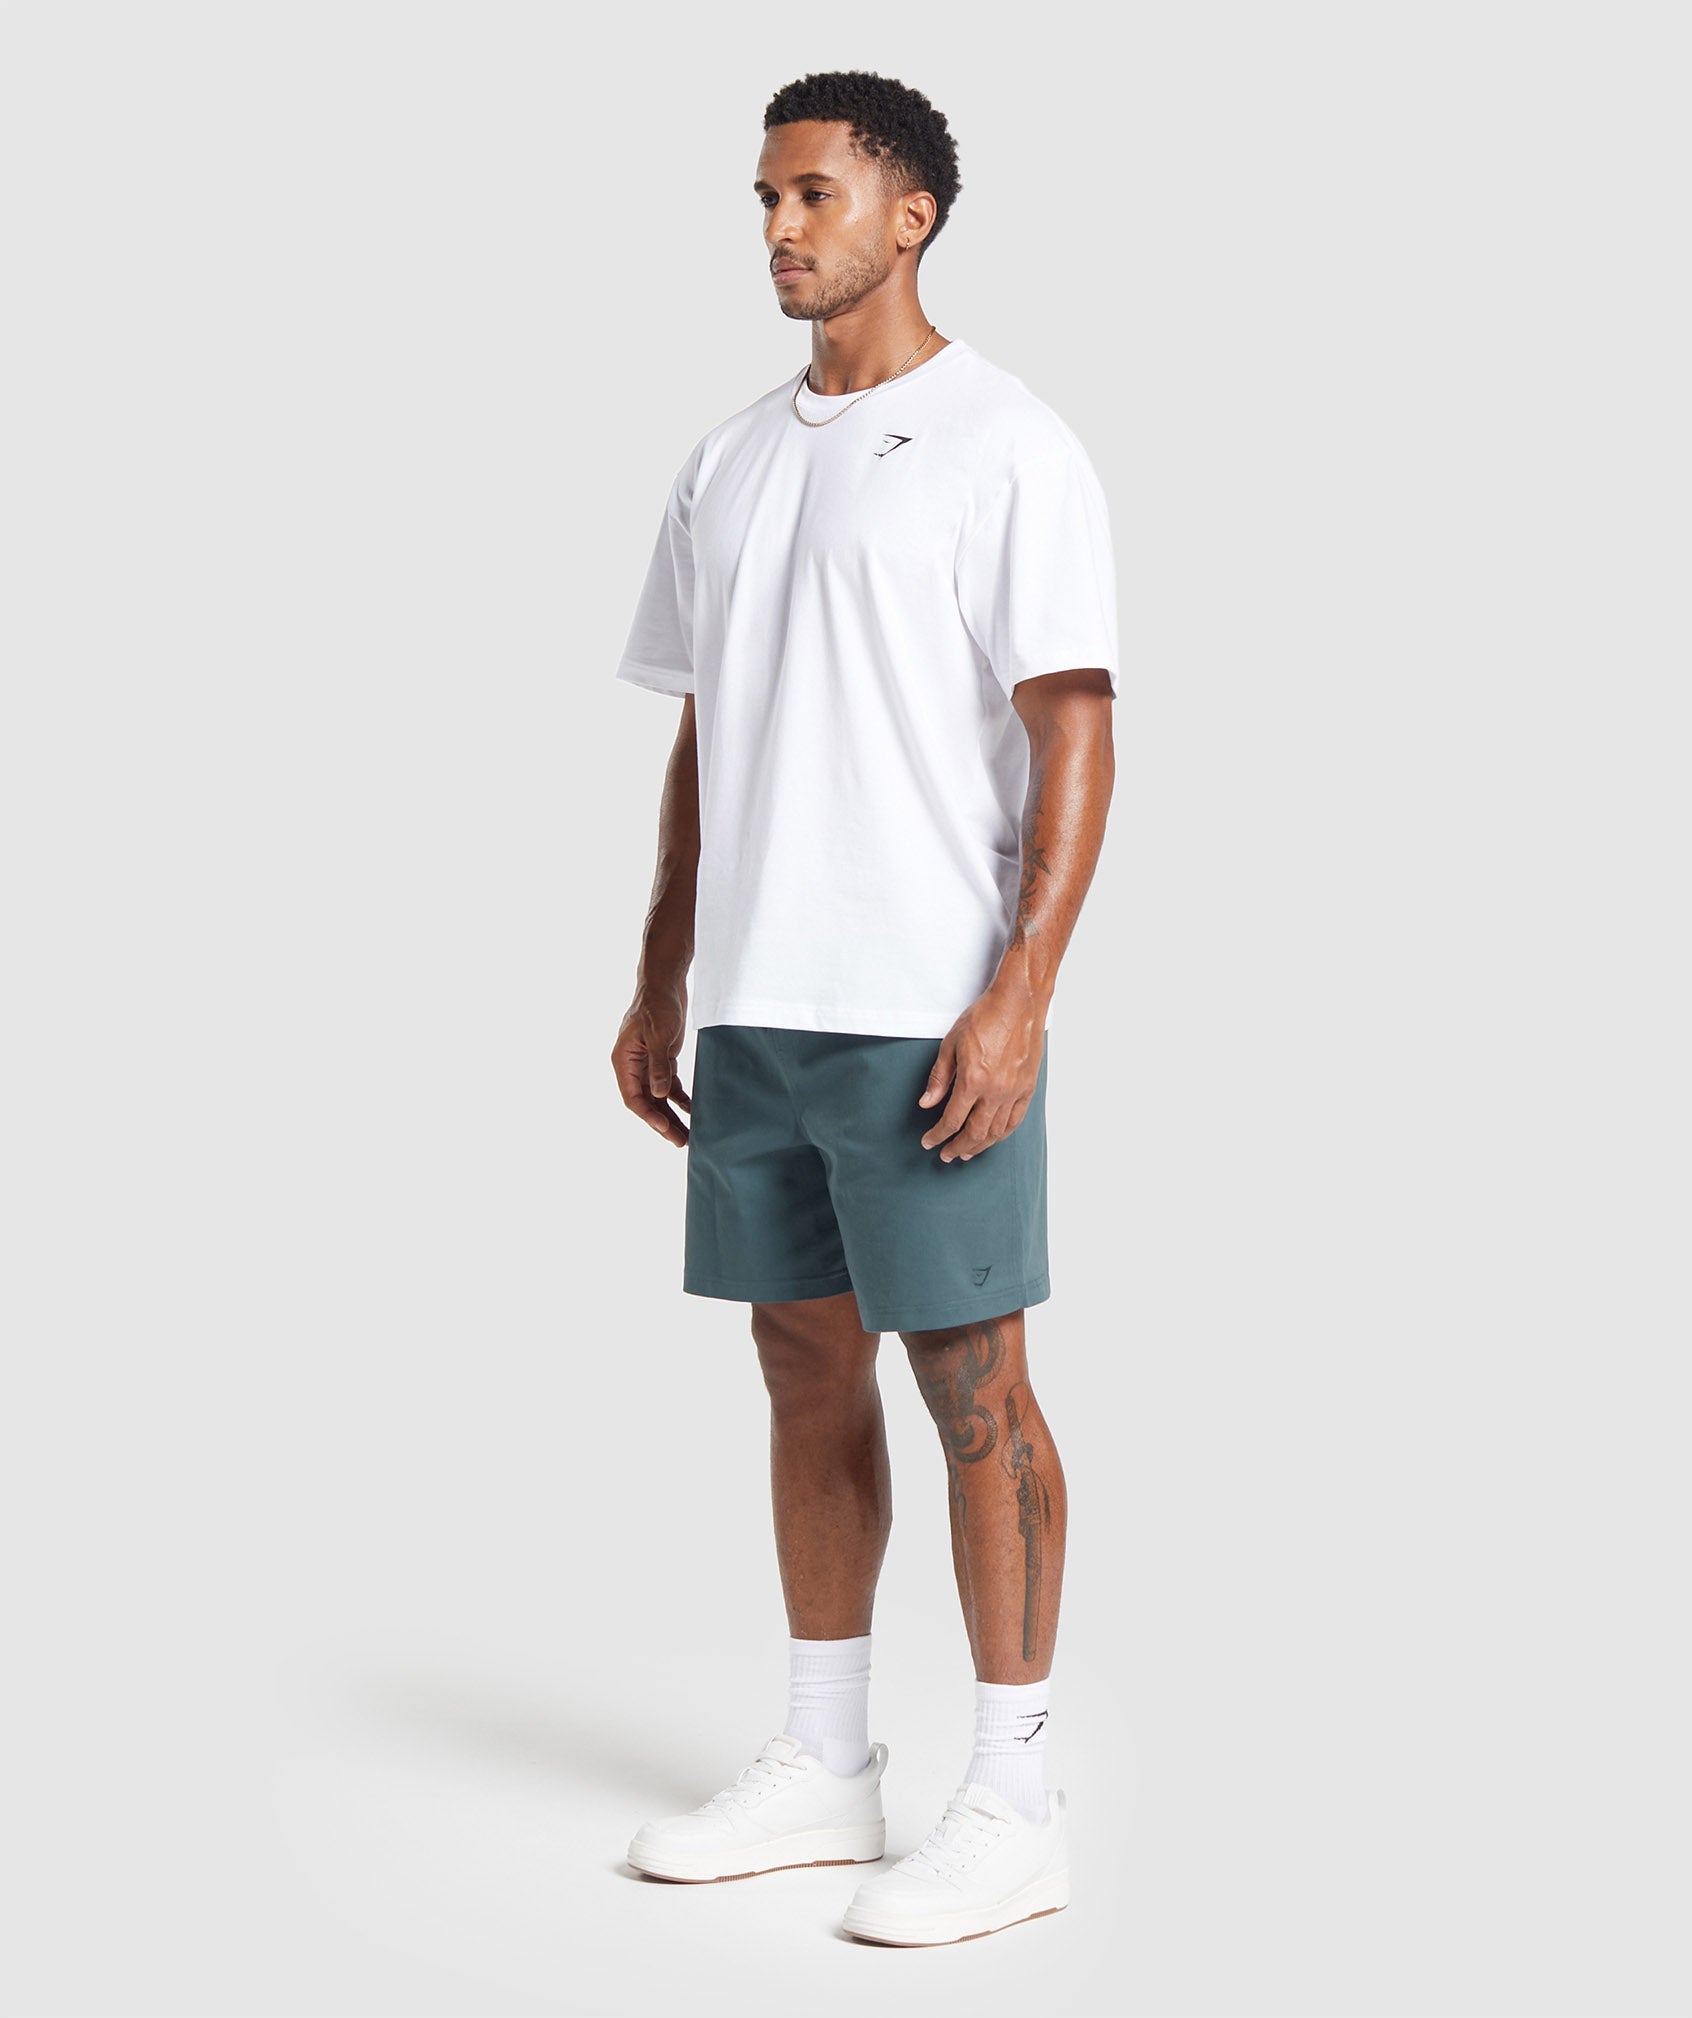 Rest Day Woven Shorts in Smokey Teal - view 4